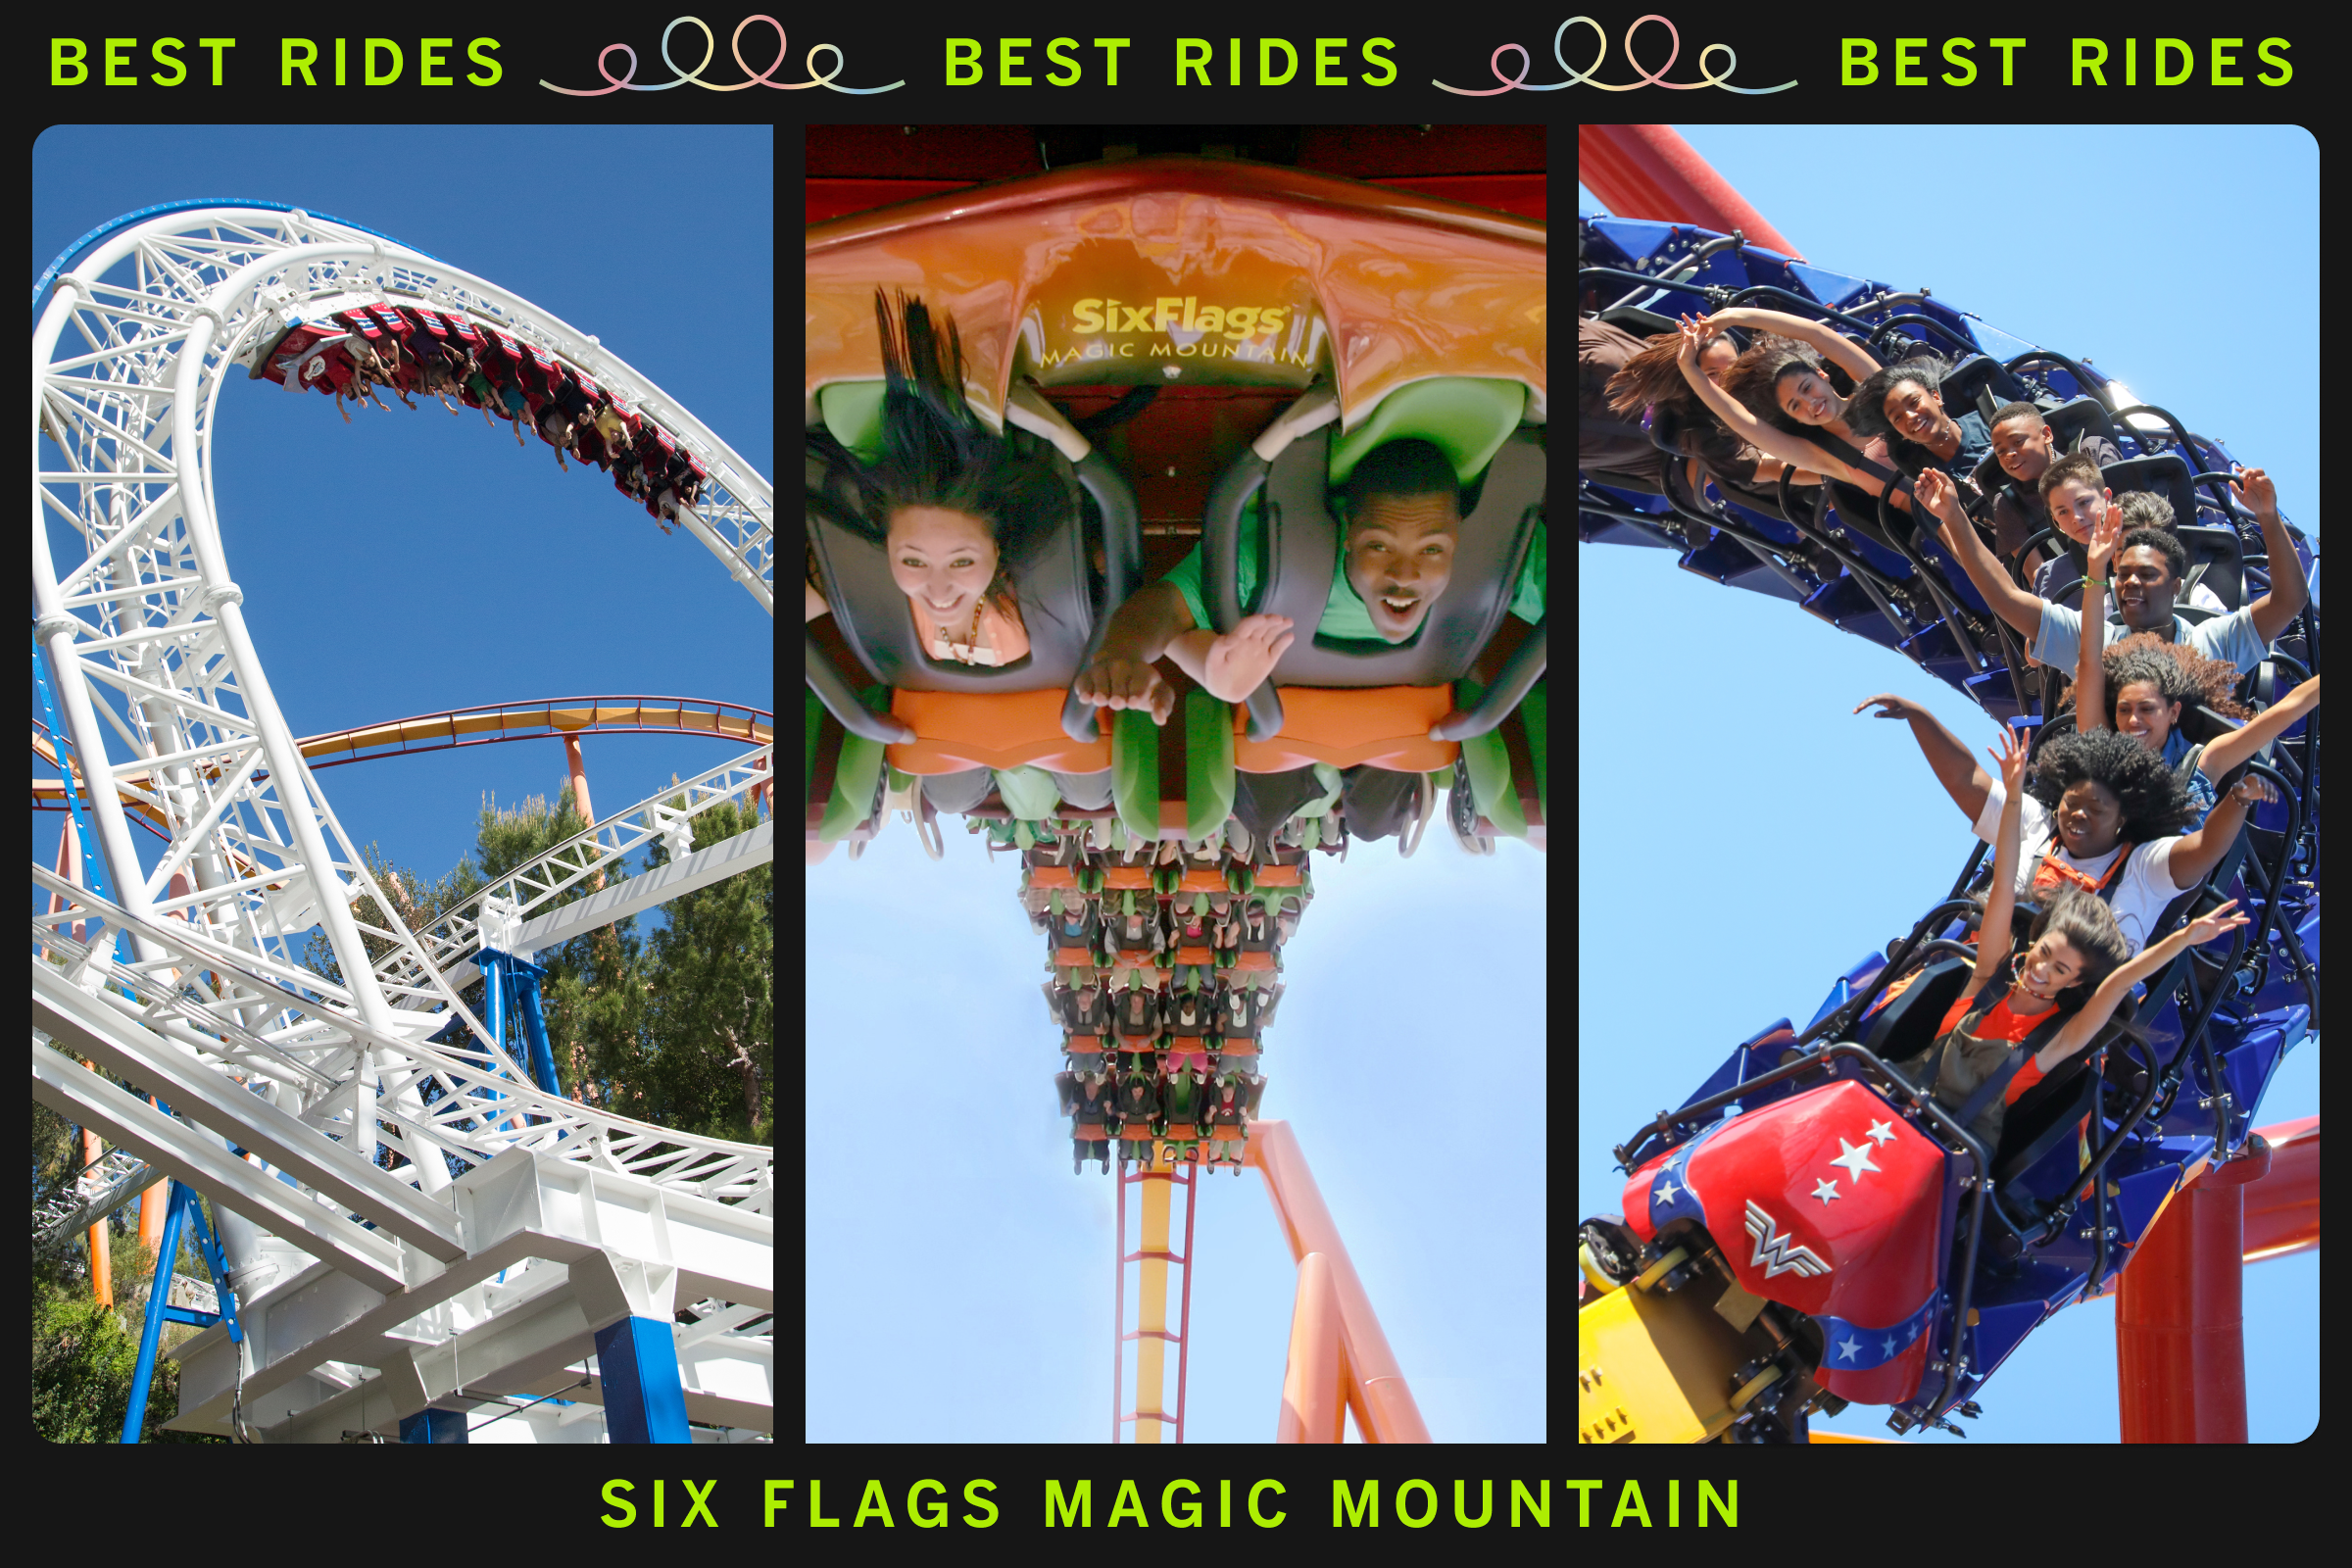 Best rides at Six Flags Magic Mountain